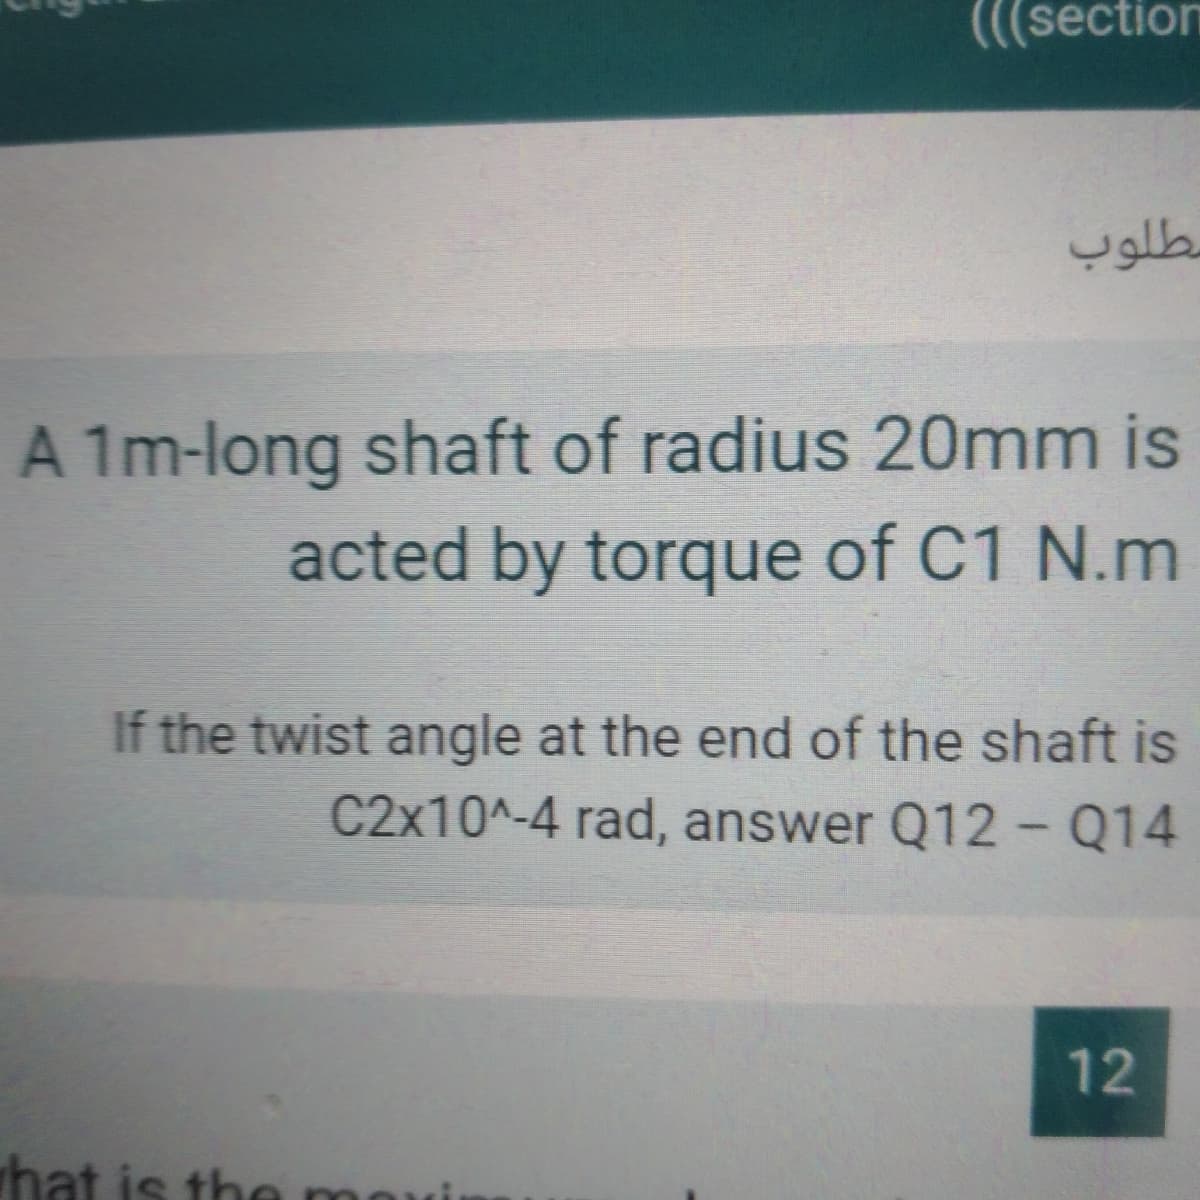 (((section
مطلوب
A 1m-long shaft of radius 20mm is
acted by torque of C1 N.m
If the twist angle at the end of the shaft is
C2x10^-4 rad, answer Q12- Q14
12
hat is the movi
